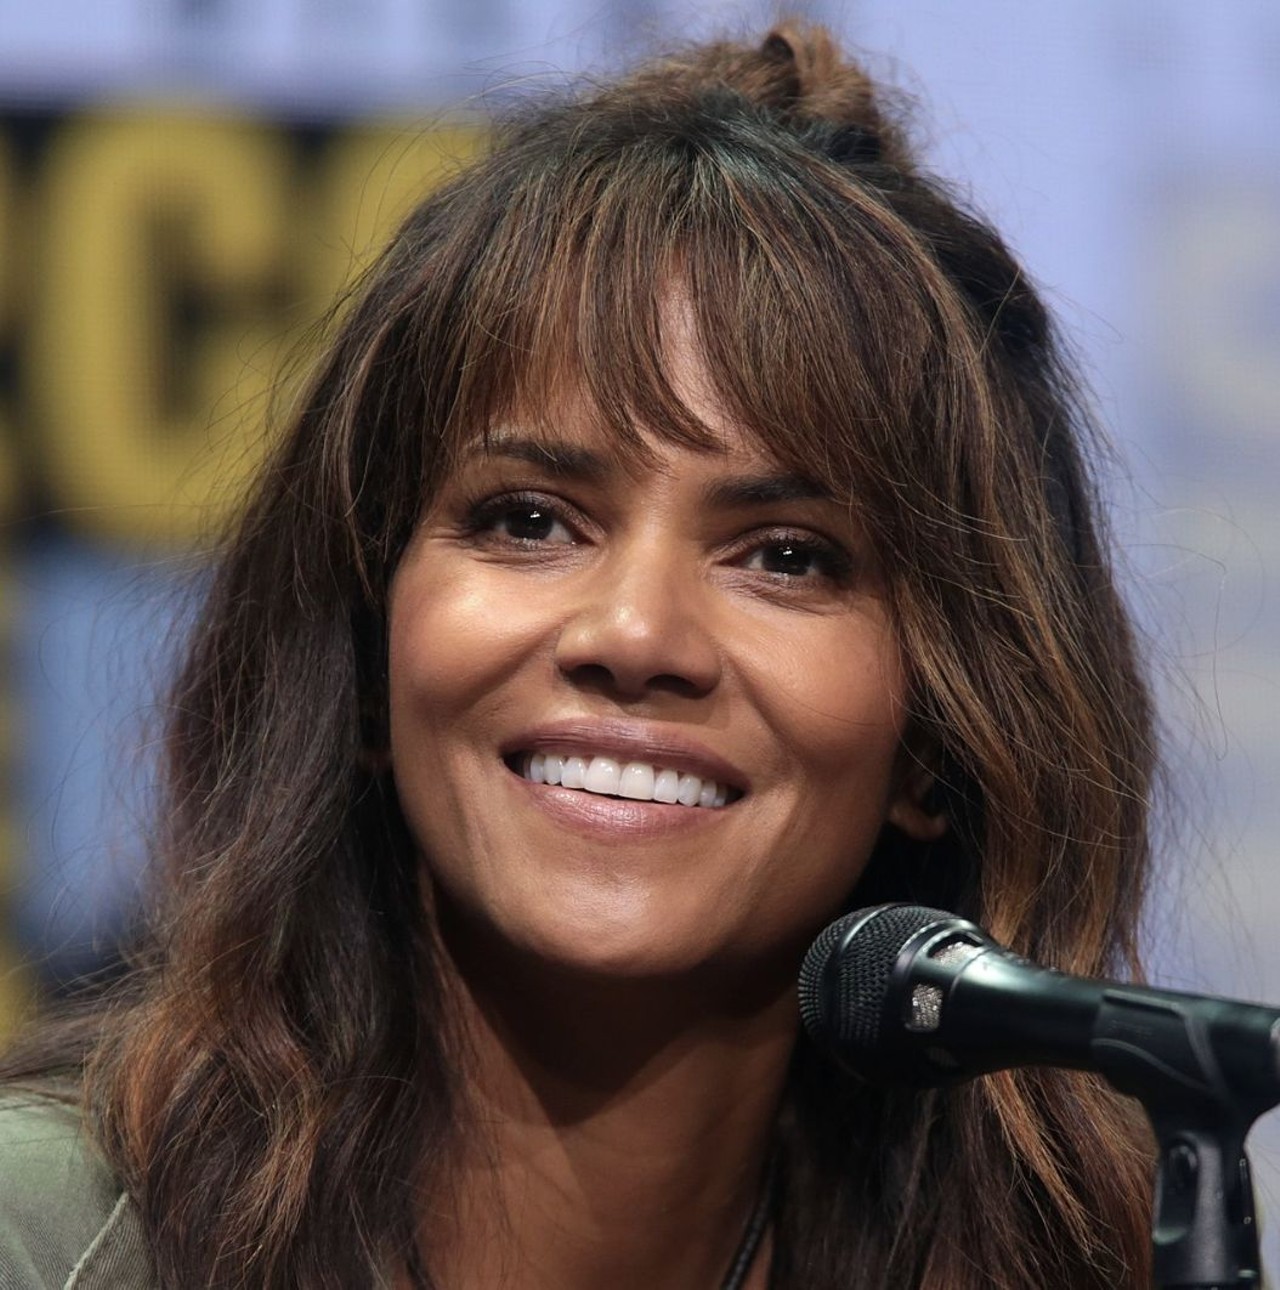  Halle Berry
Berry, who grew up in Oakwood and attended Bedford High School and Cuyahoga Community College, won the Academy Award for Best Actress in 2002 for her work in the film Monsters Ball. She&#146; also has starred in many other films like Swordfish, multiple X-Men films, and the Bond film Die Another Day. In 2003, she was named number one on People Magazine&#146;s Most Beautiful People In The World list. 
Photo via Wikimedia/Gage Skidmore